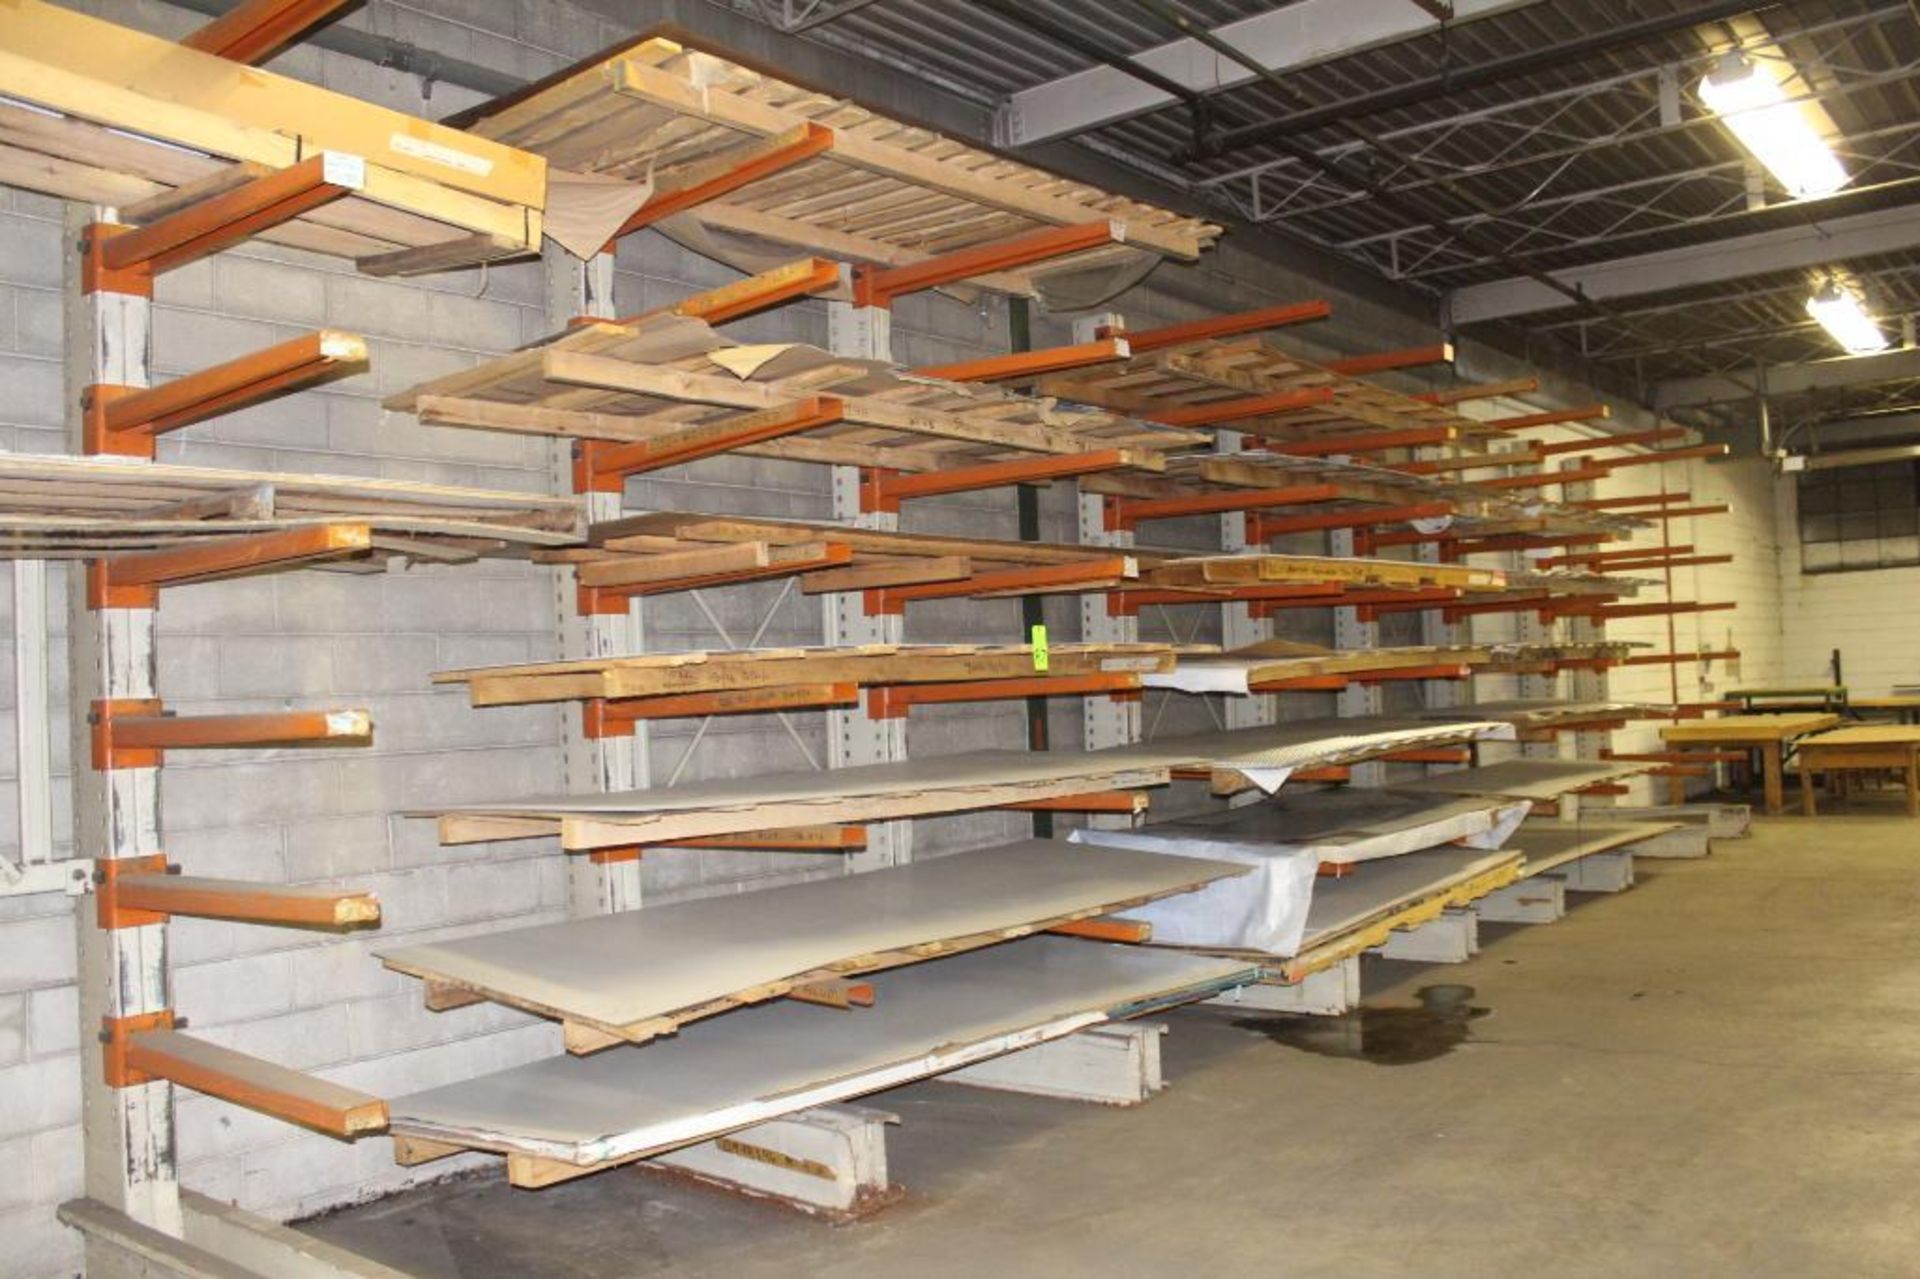 Lot of Assorted Sheet Stock, Treated & Coated Stainless Steel & Aluminum, Stock Only - No Racks Incl - Image 3 of 4